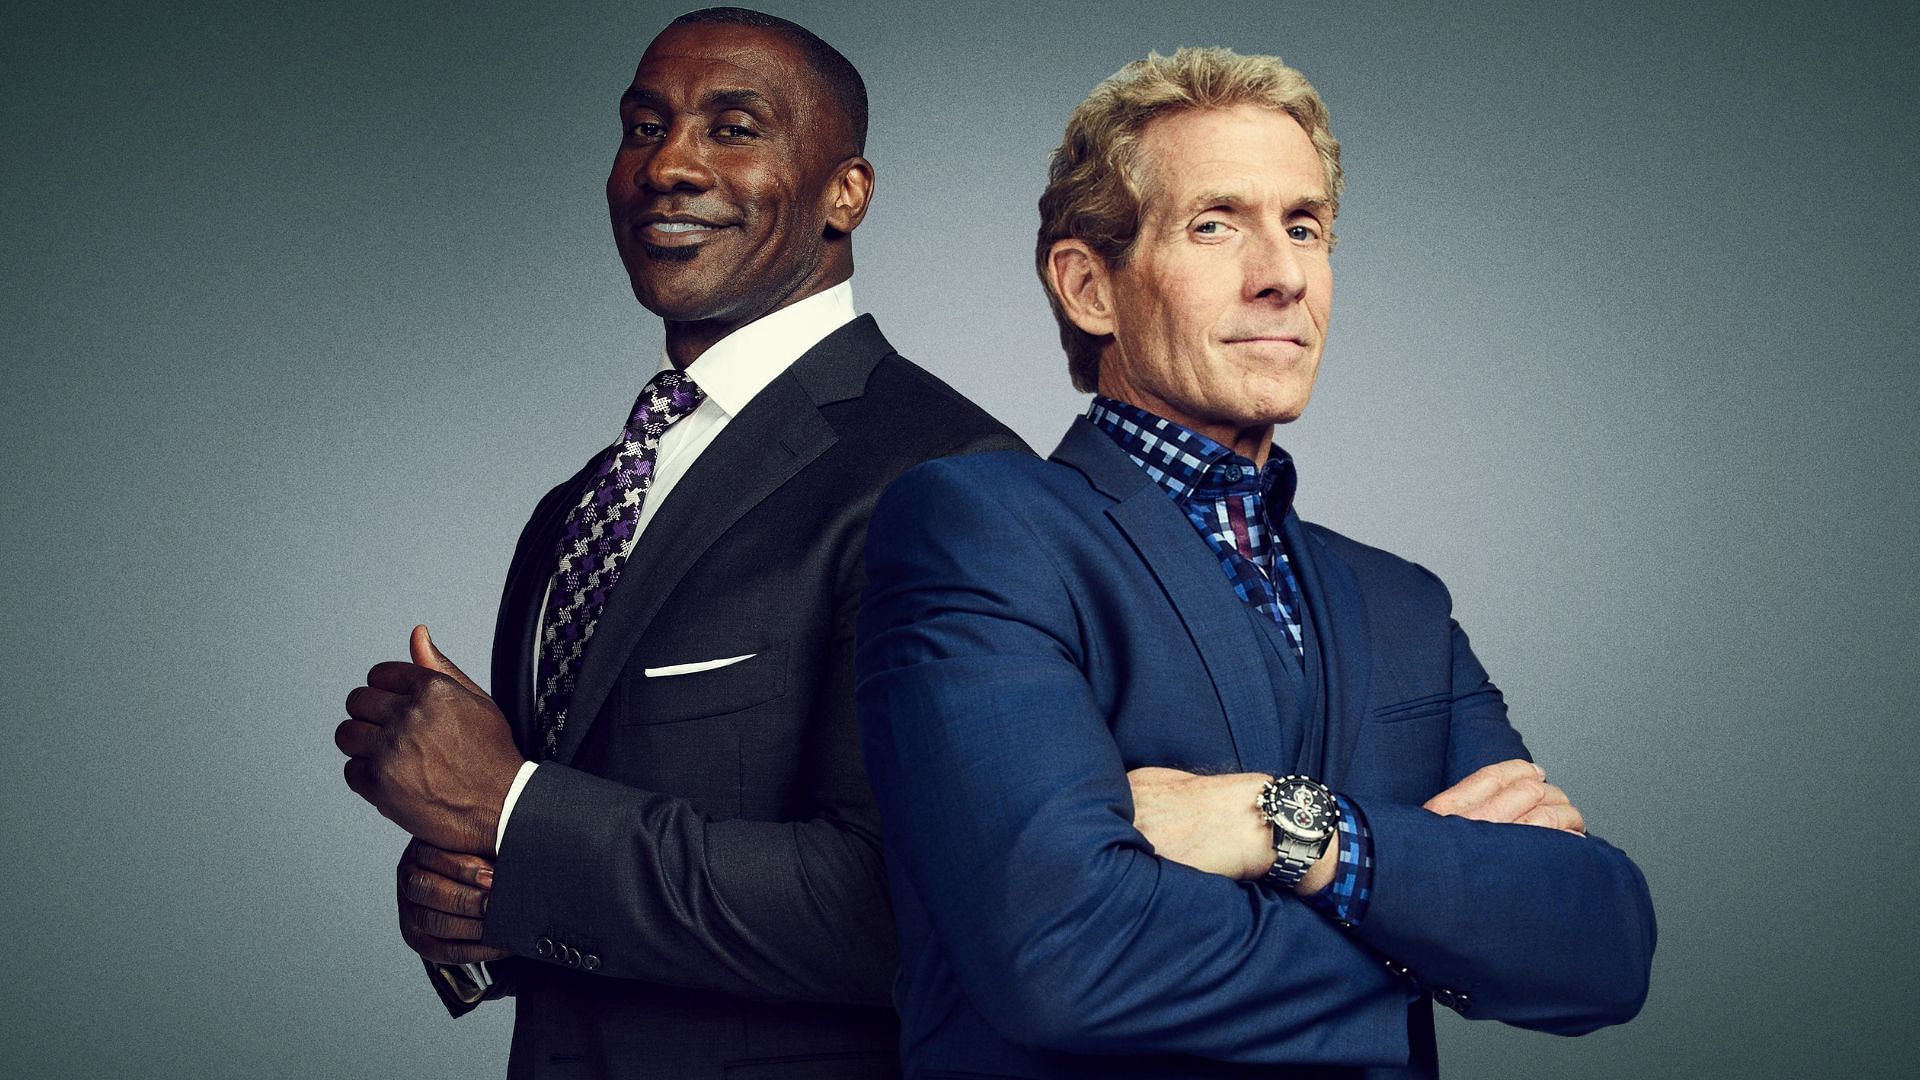 Shannon Sharpe left Undisputed after nearly seven years of debating sports topics with Skip Bayless. (Image credit: Fox Sports)